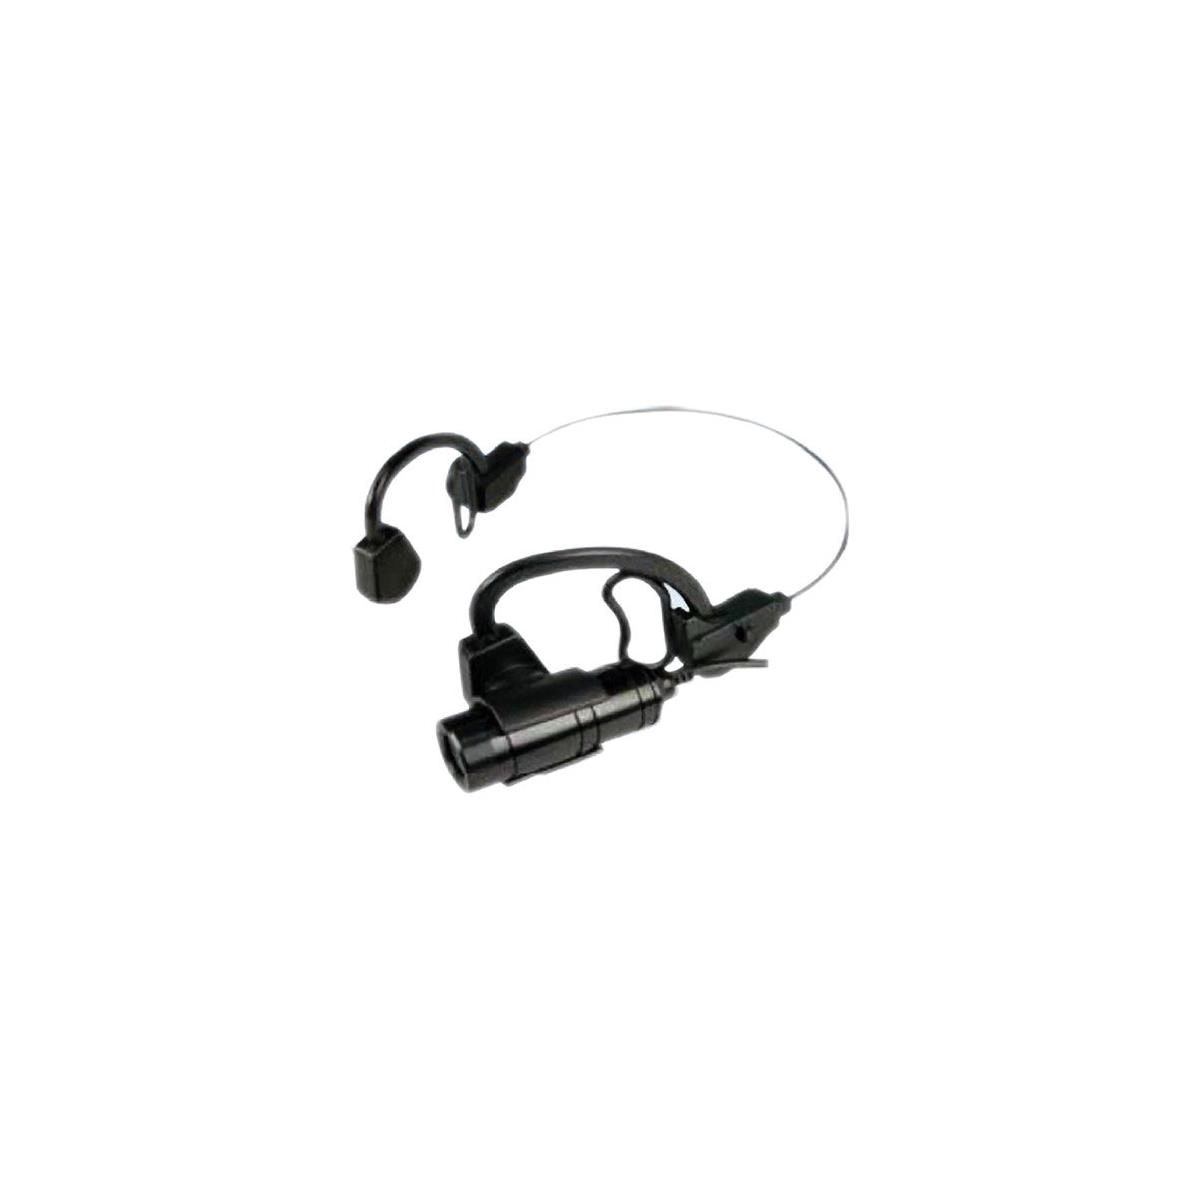 550TVL Wired Color Tactical Headset Camera - KJB Security Products C11871